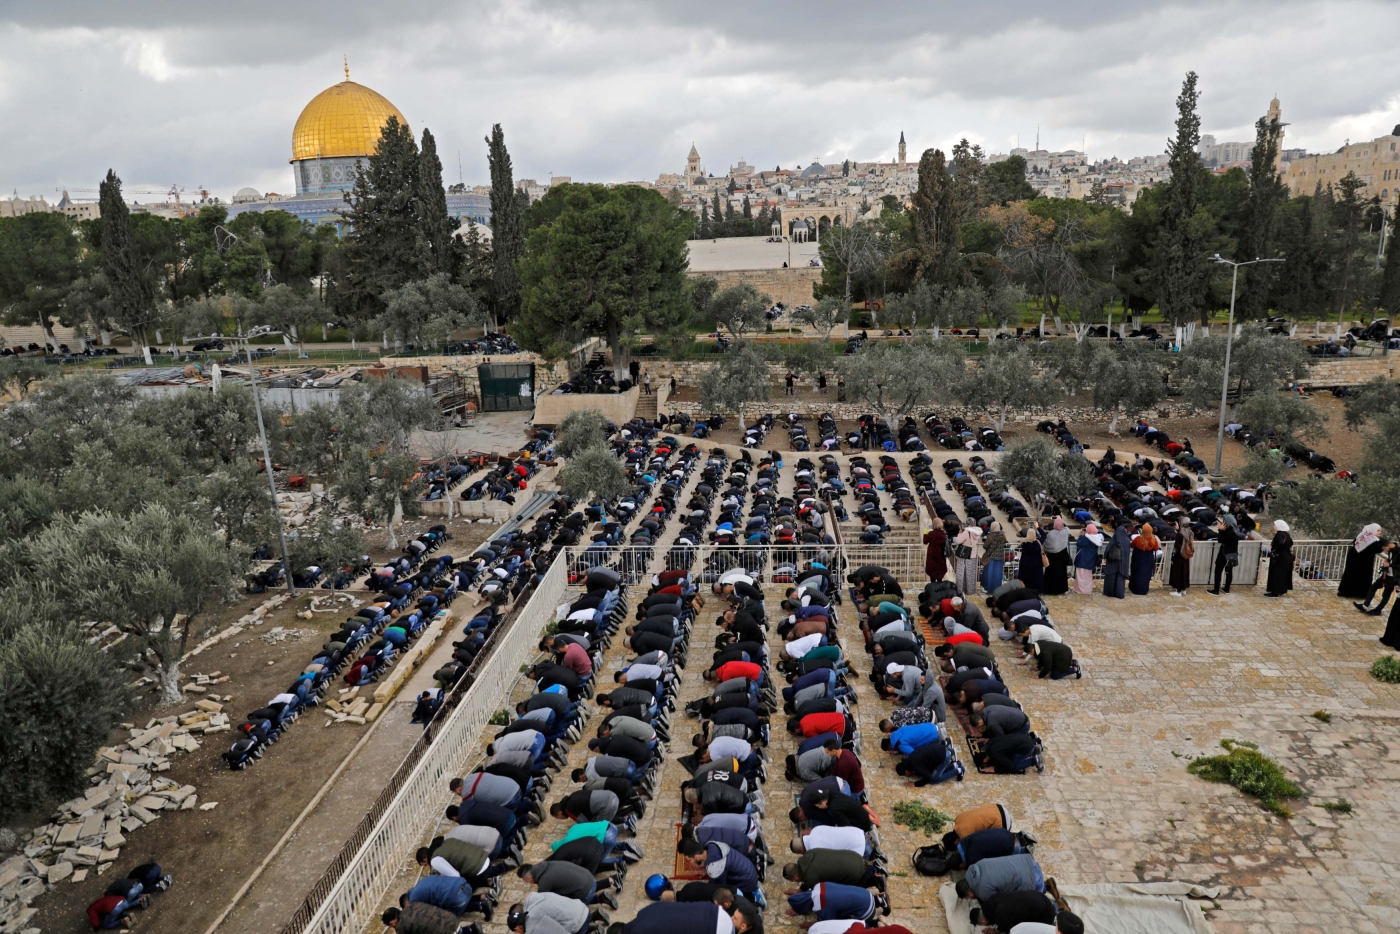 Palestinians Muslim worshippers pray in the Al-Aqsa Mosque compound in the Old City of Jerusalem, on 22 February 2019 (AFP)